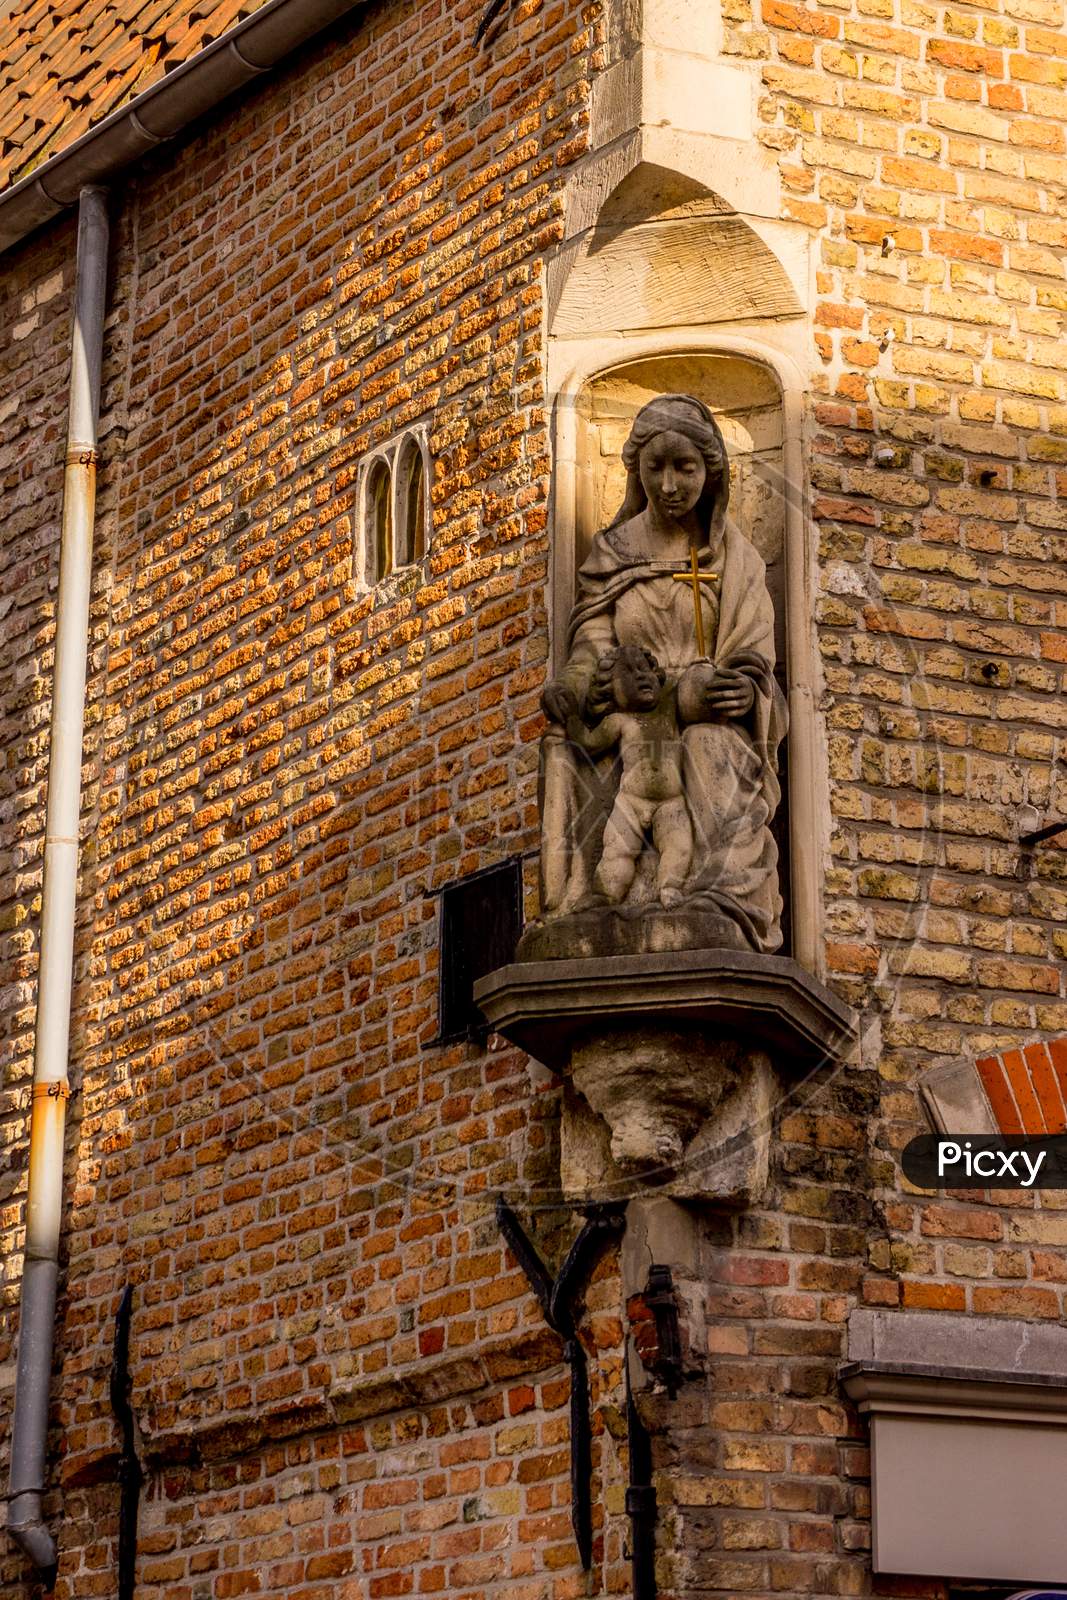 Belgium, Bruges, Madonna And Baby Jesus Sculpture On A Building Wall